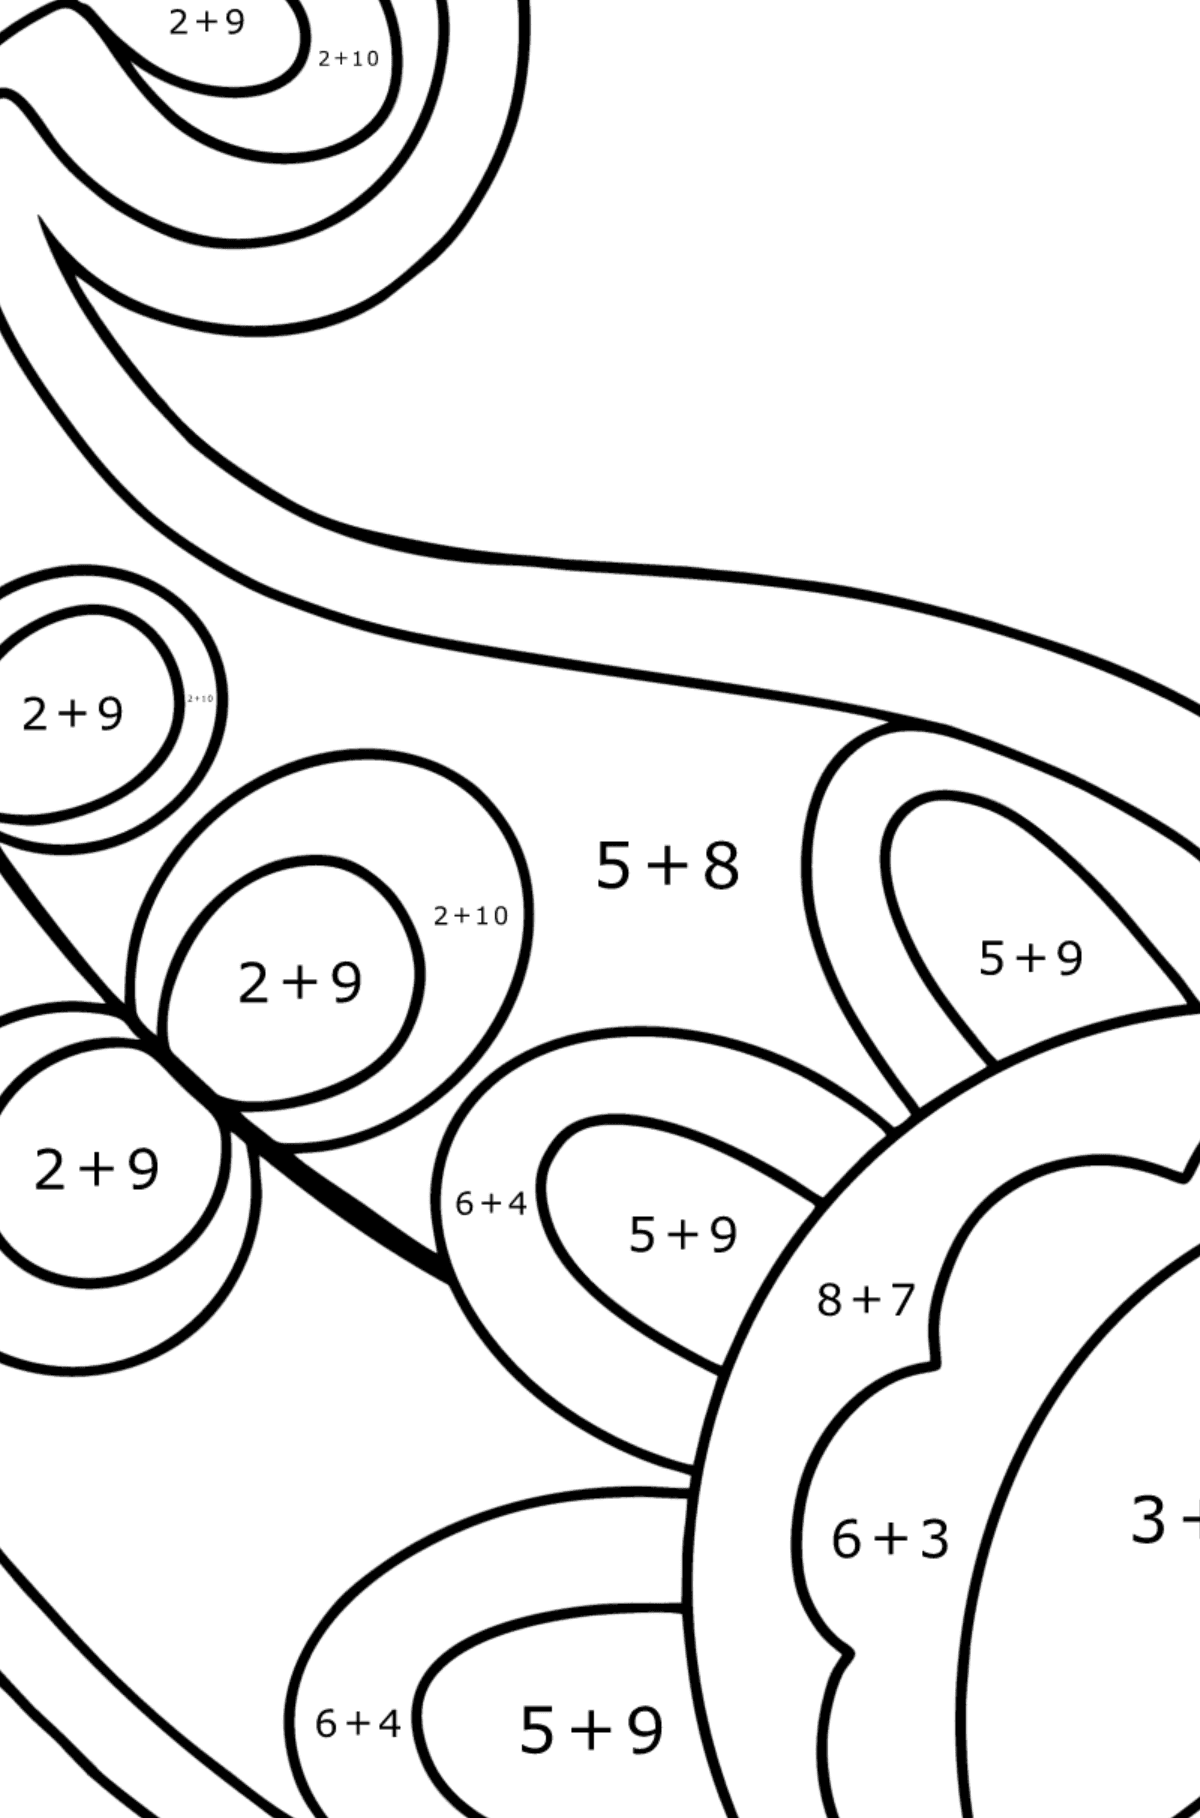 Paisley coloring page for Kids - Math Coloring - Addition for Kids